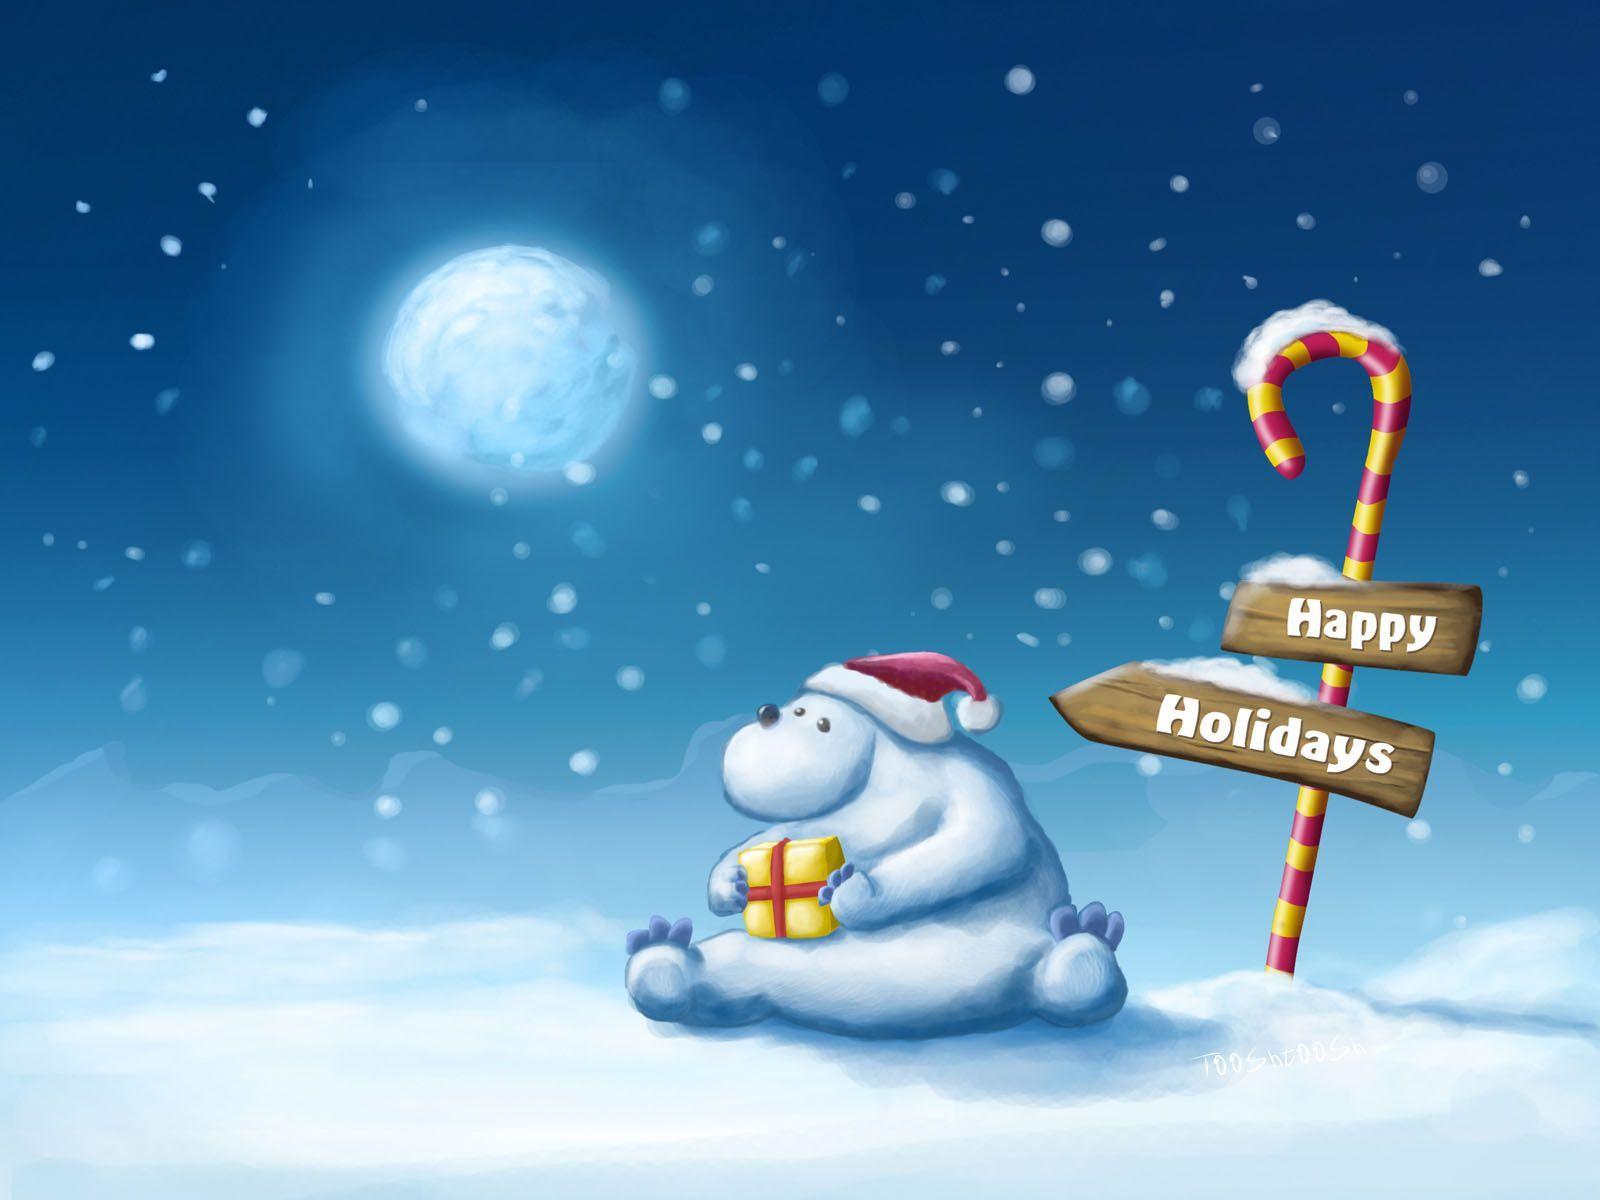 Free Christmas Background Image For Computer